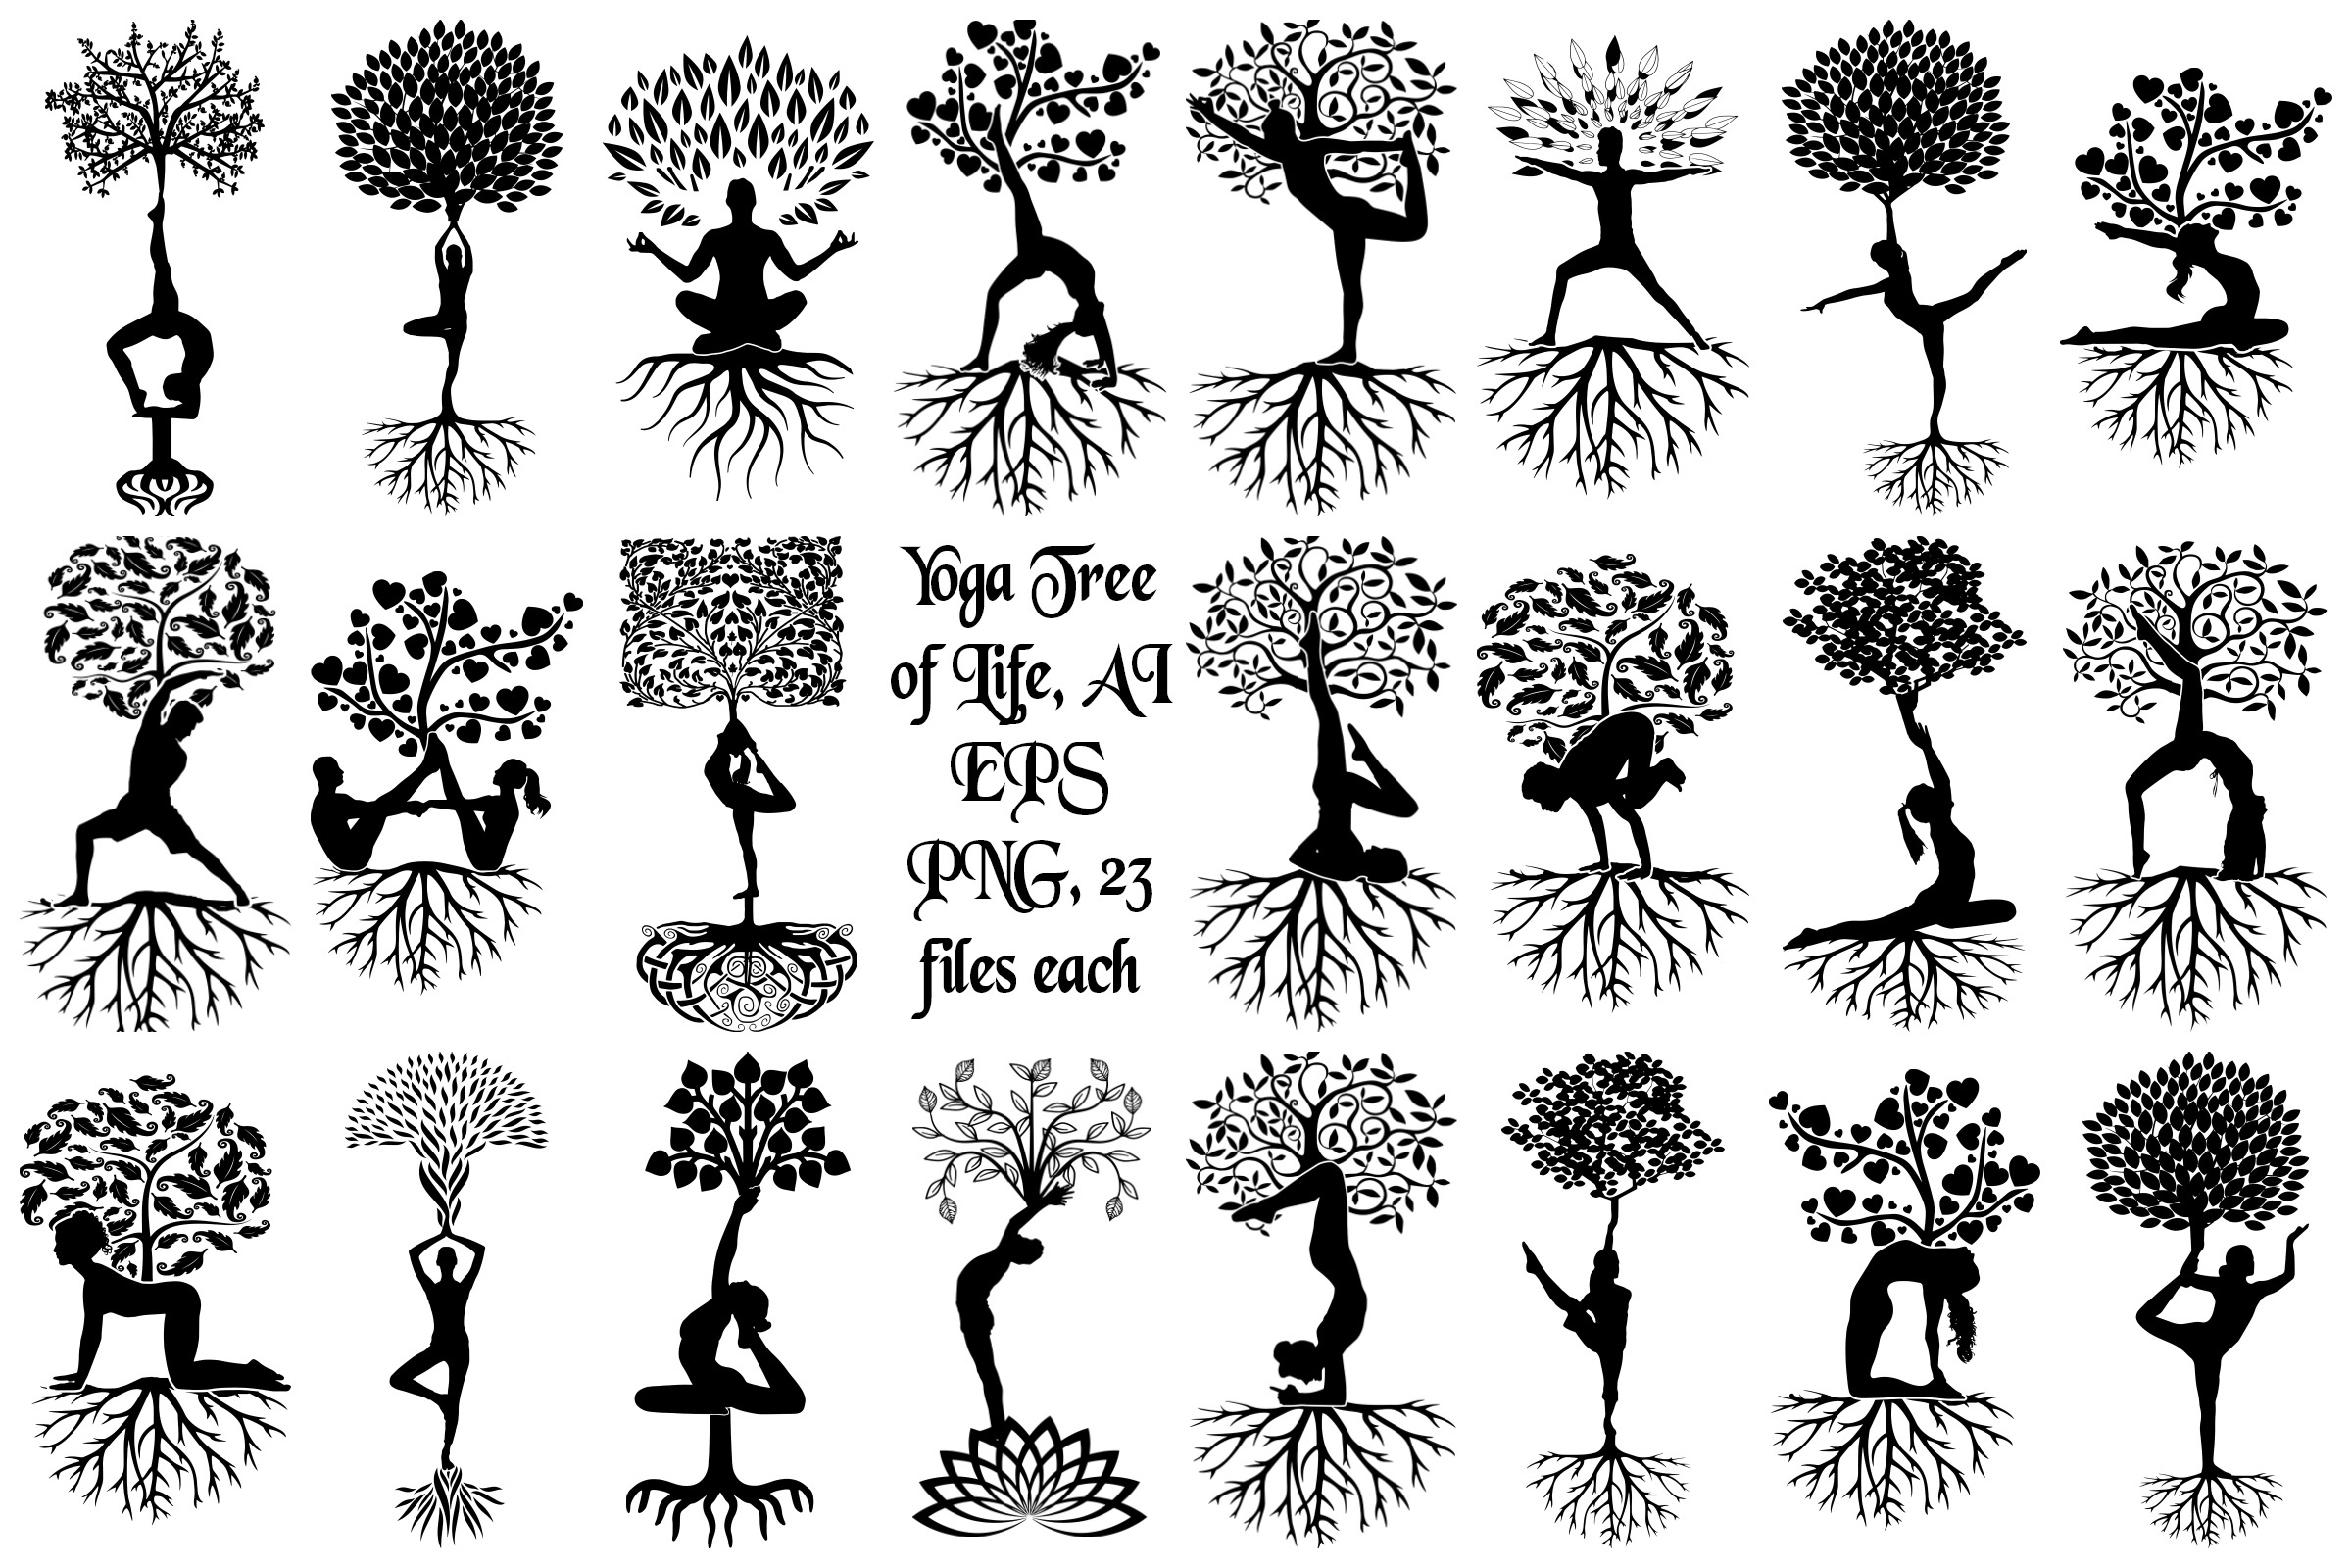 Download Yoga Tree Silhouettes AI EPS Vector & PNG